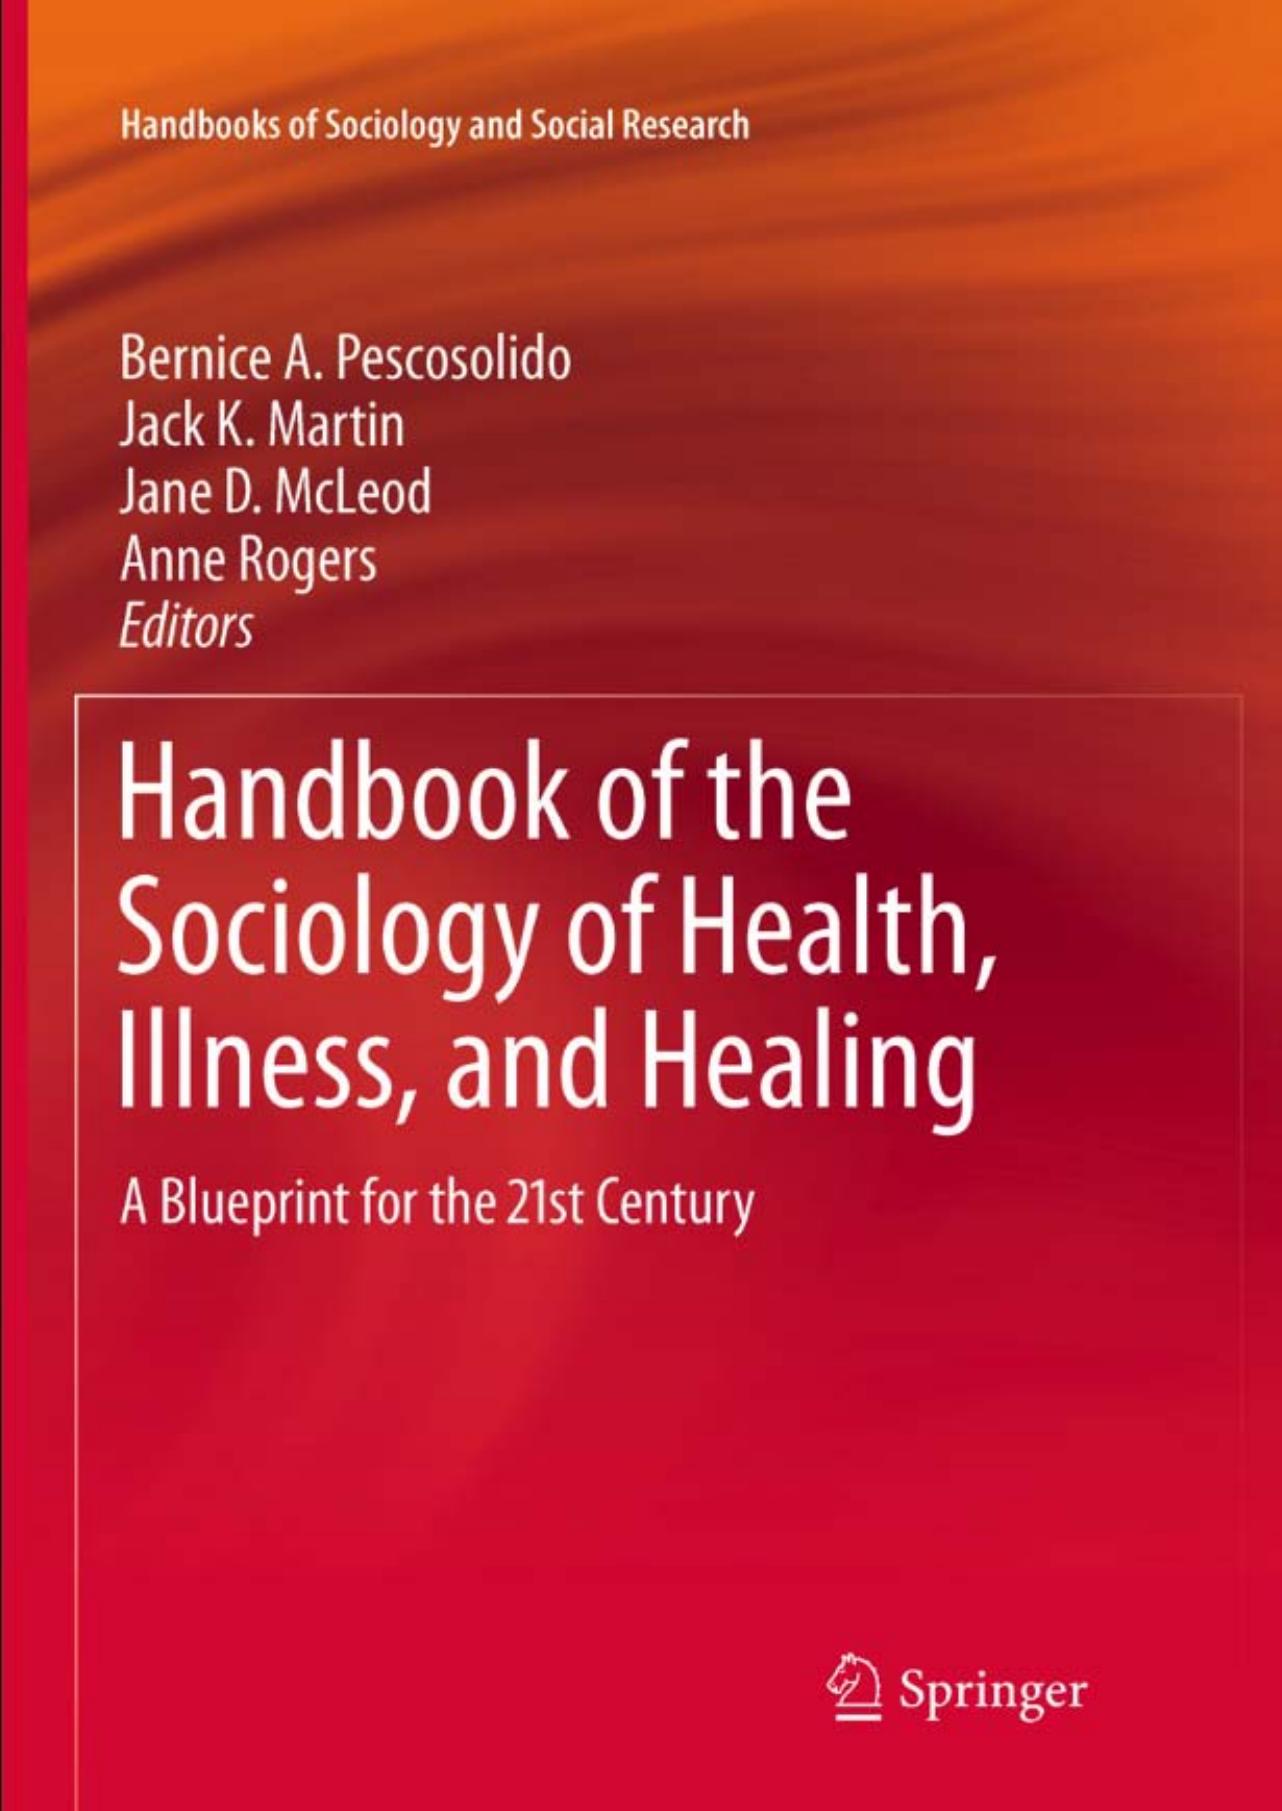 Handbook of the Sociology of Health, Illness, and Healing A Blueprint for the 21st Century 2011